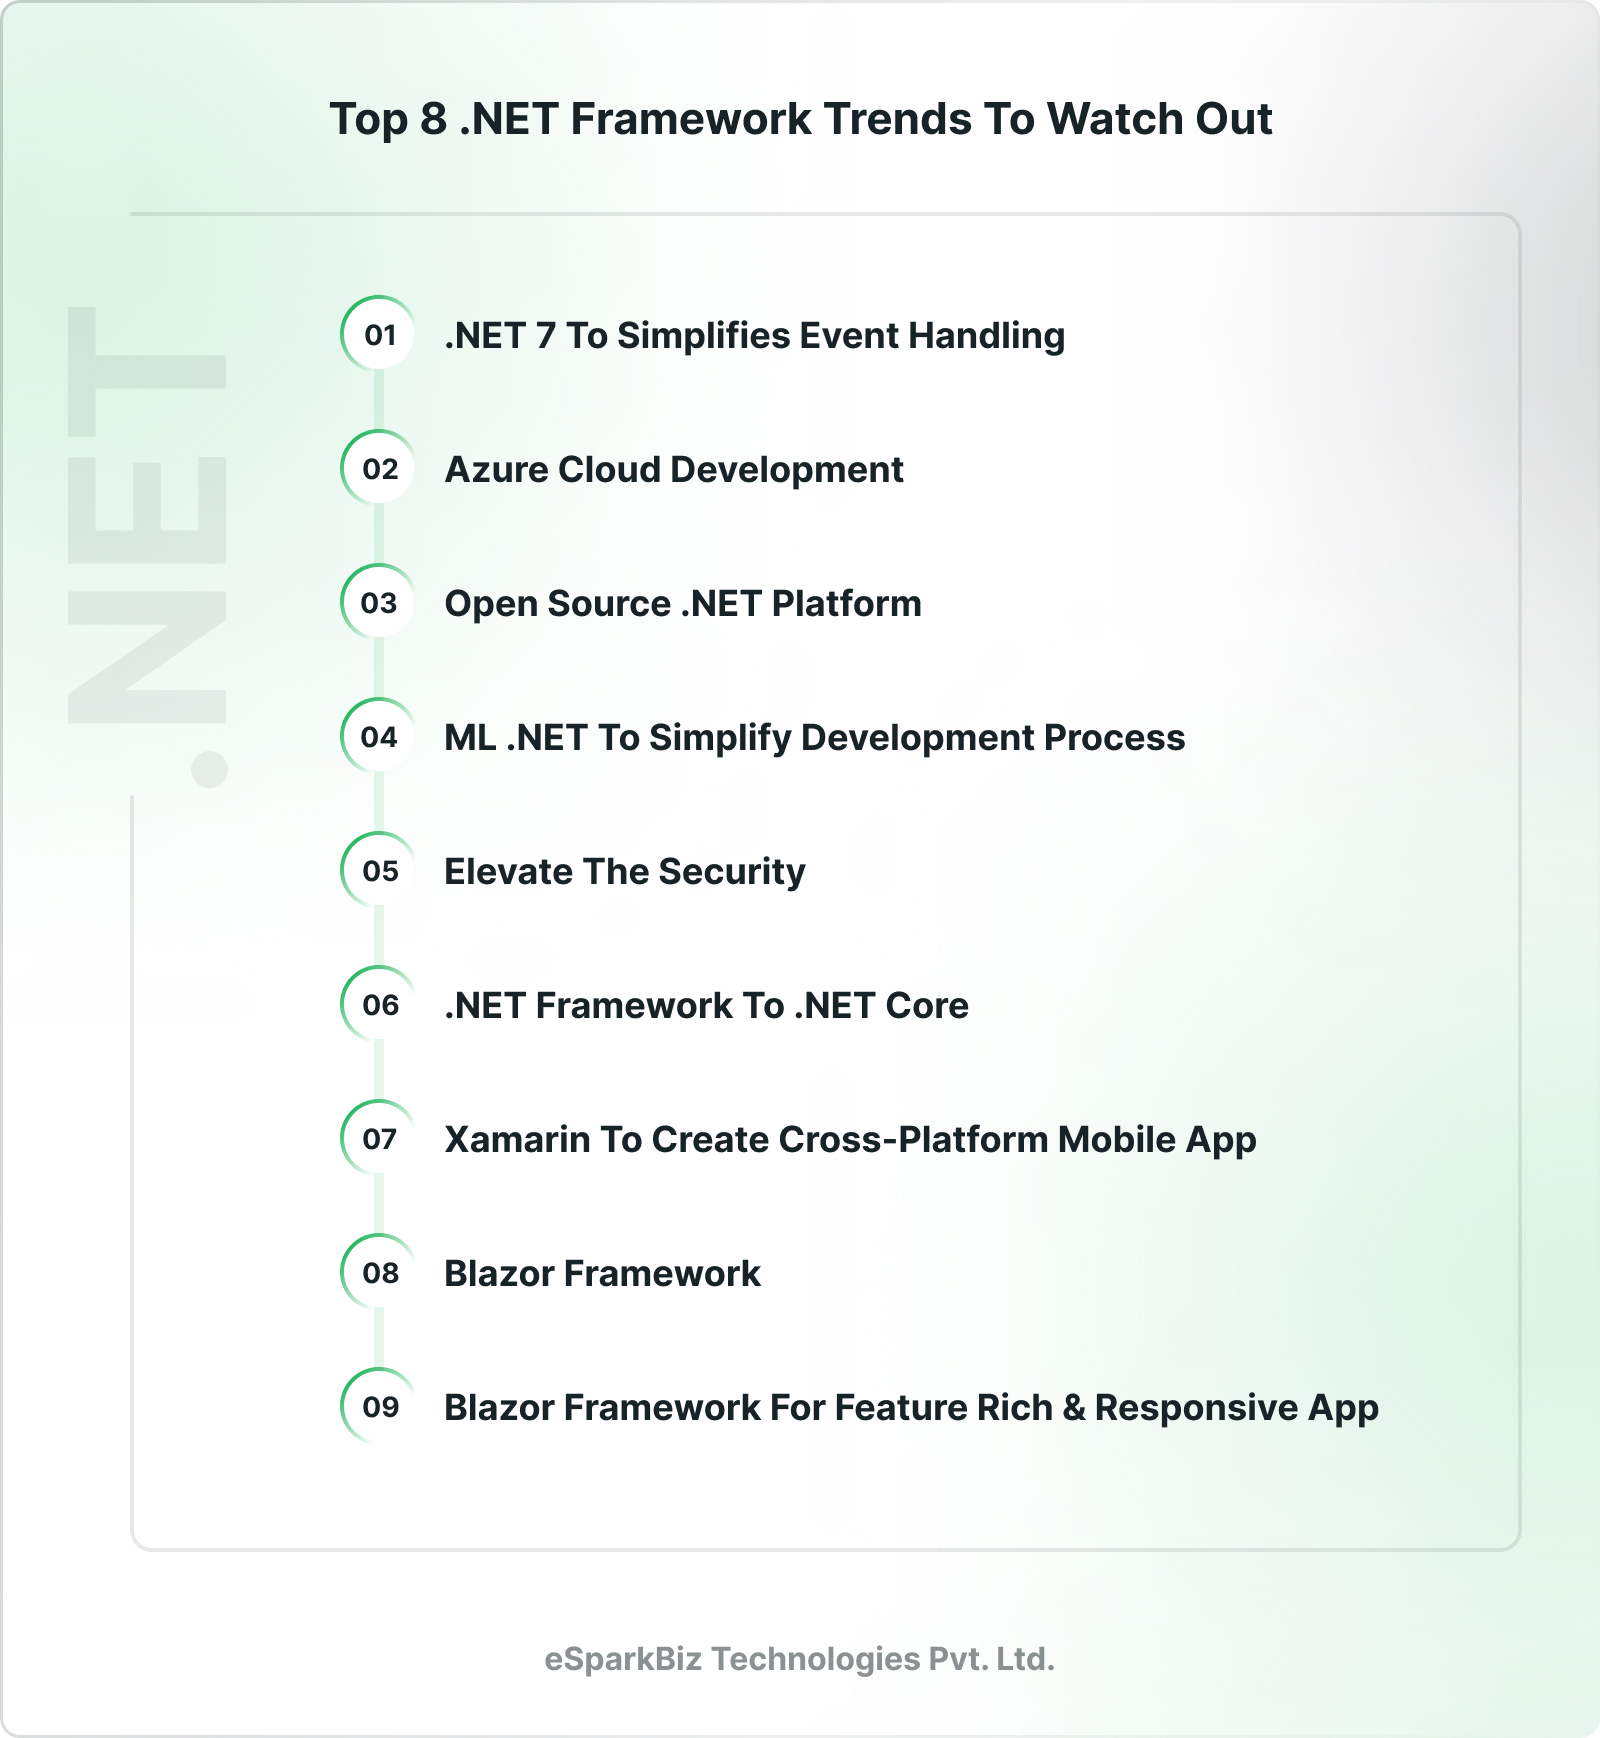 Top 8 .NET Framework Trends to Watch Out for in 2023